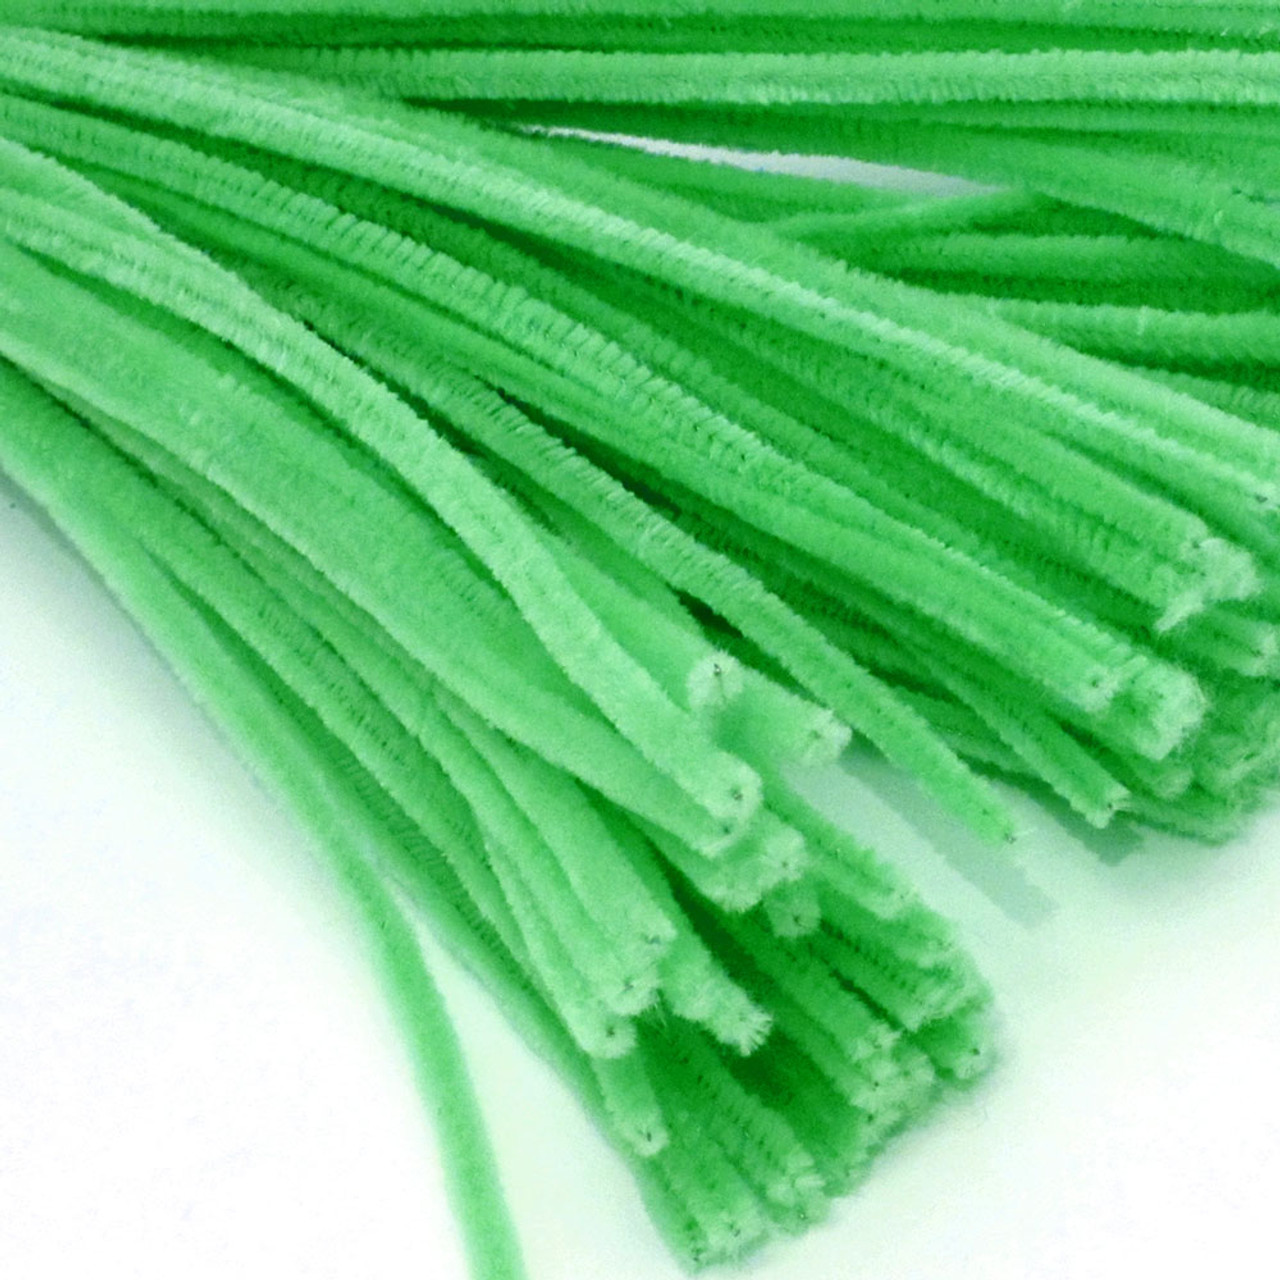 12 Pipe Cleaner Stems: 6mm Chenille Moss Green (100) [MA200130